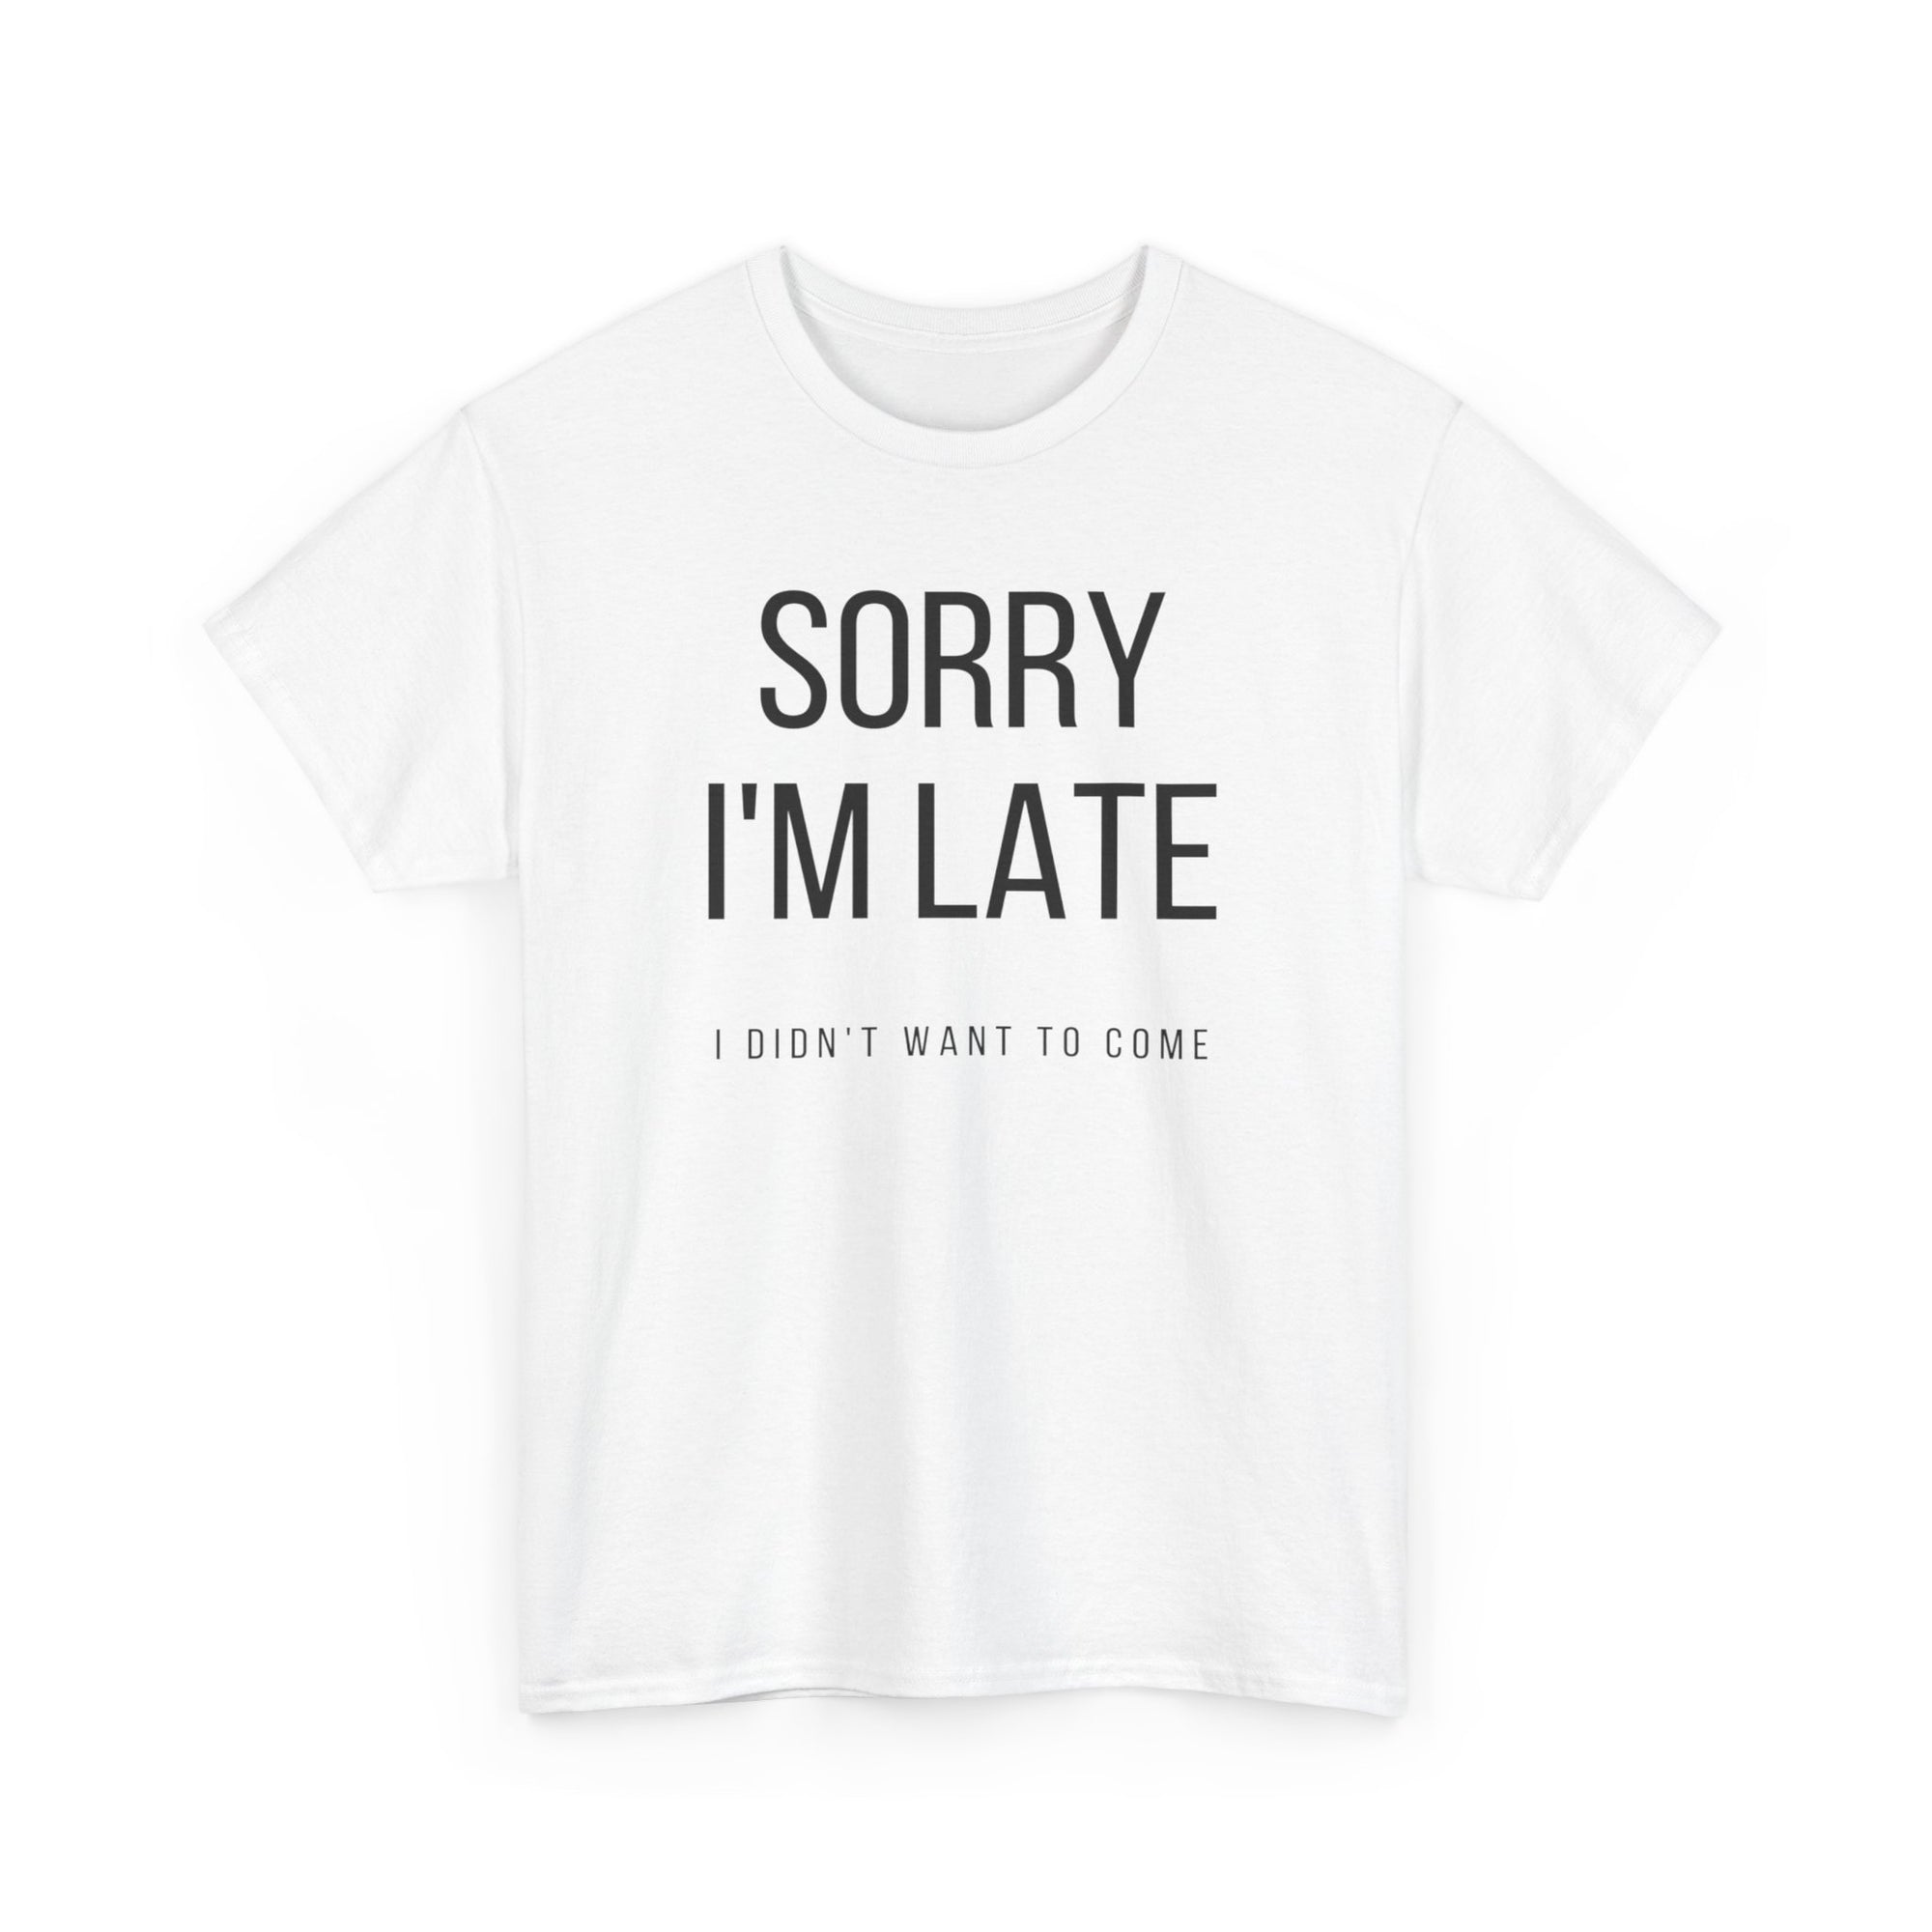 T Shirt Printed Sorry I'm Late I didn't Want To Come